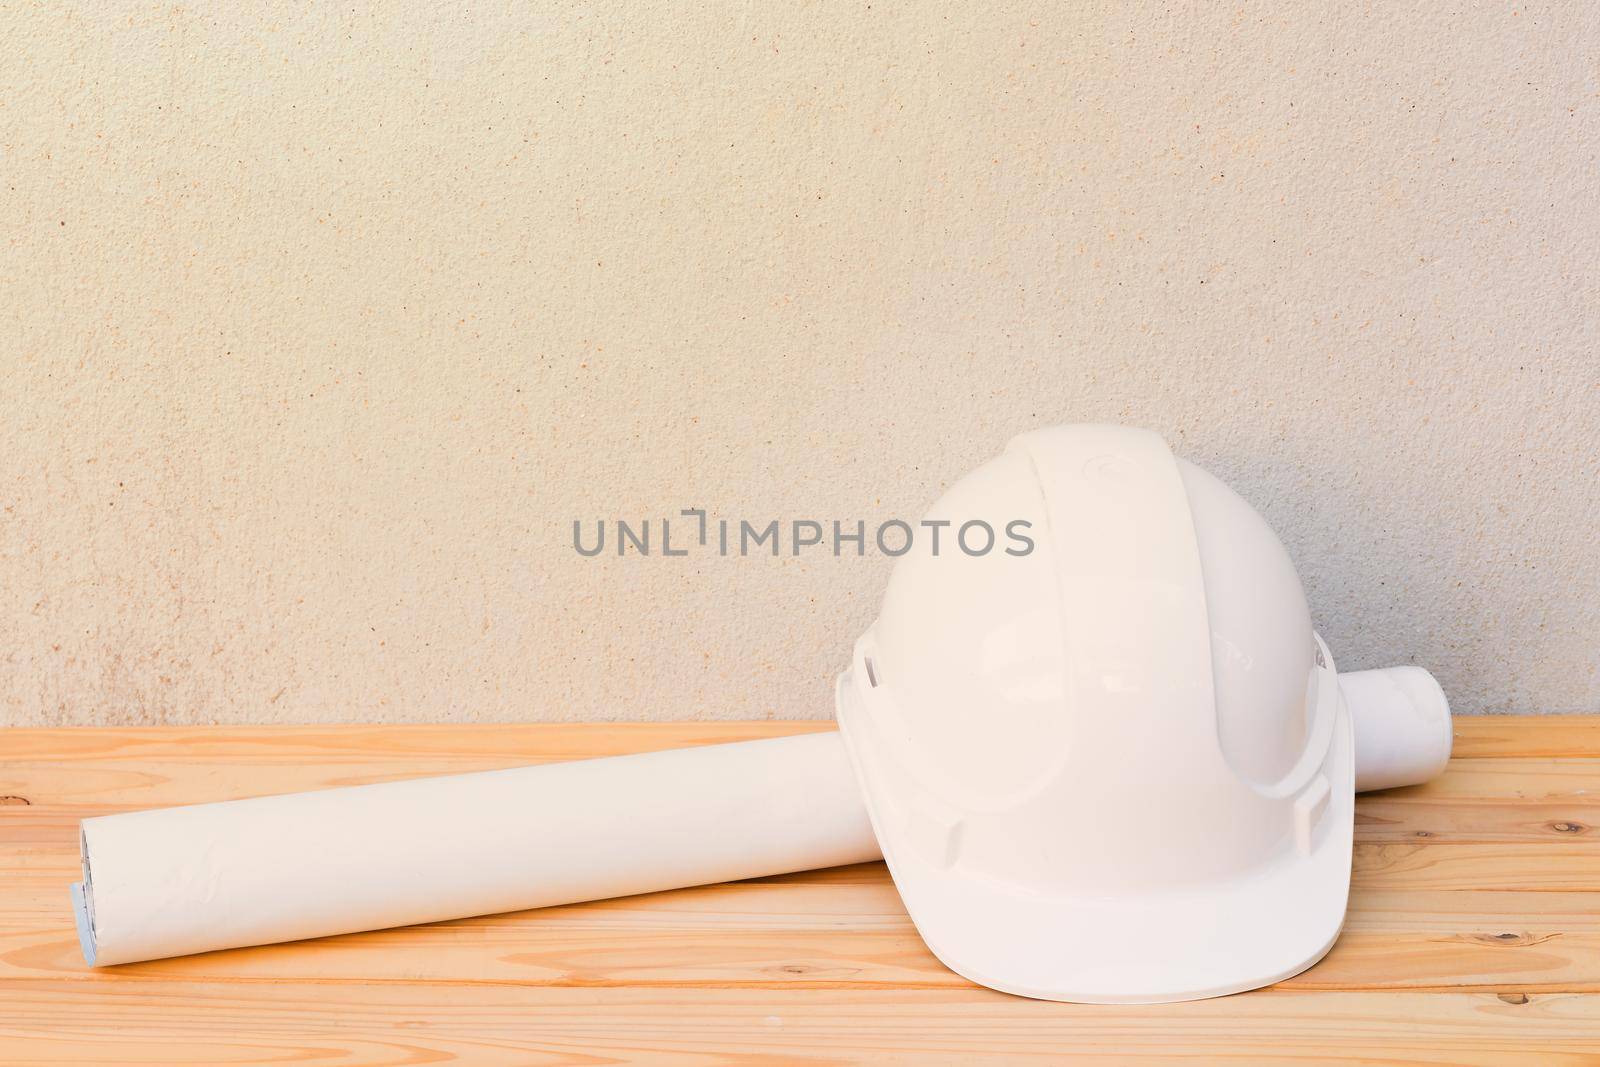 white safety helmet plastic and paper roll plan blueprint construction of engineering on wood floor table background with copy space add text